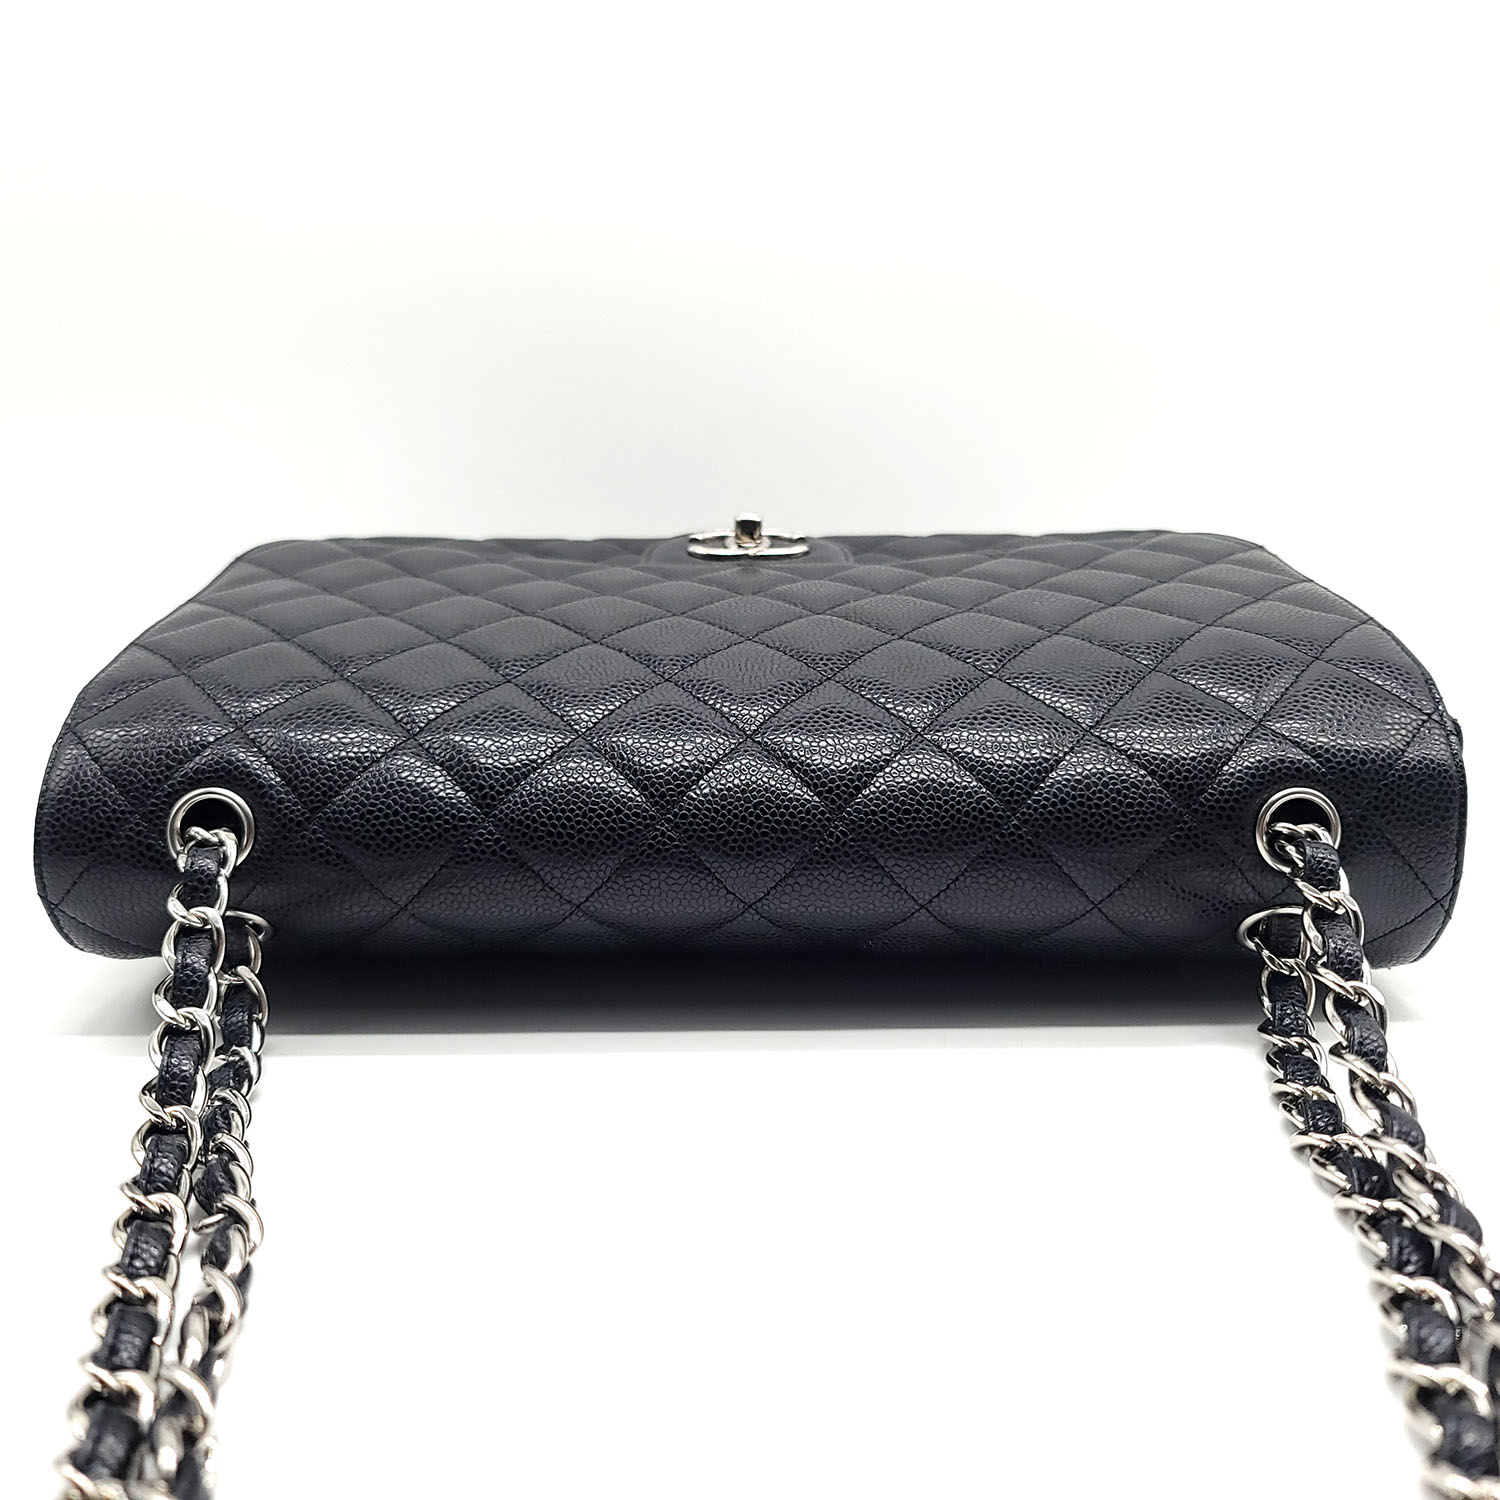 chanel classic quilted leather chain handbag